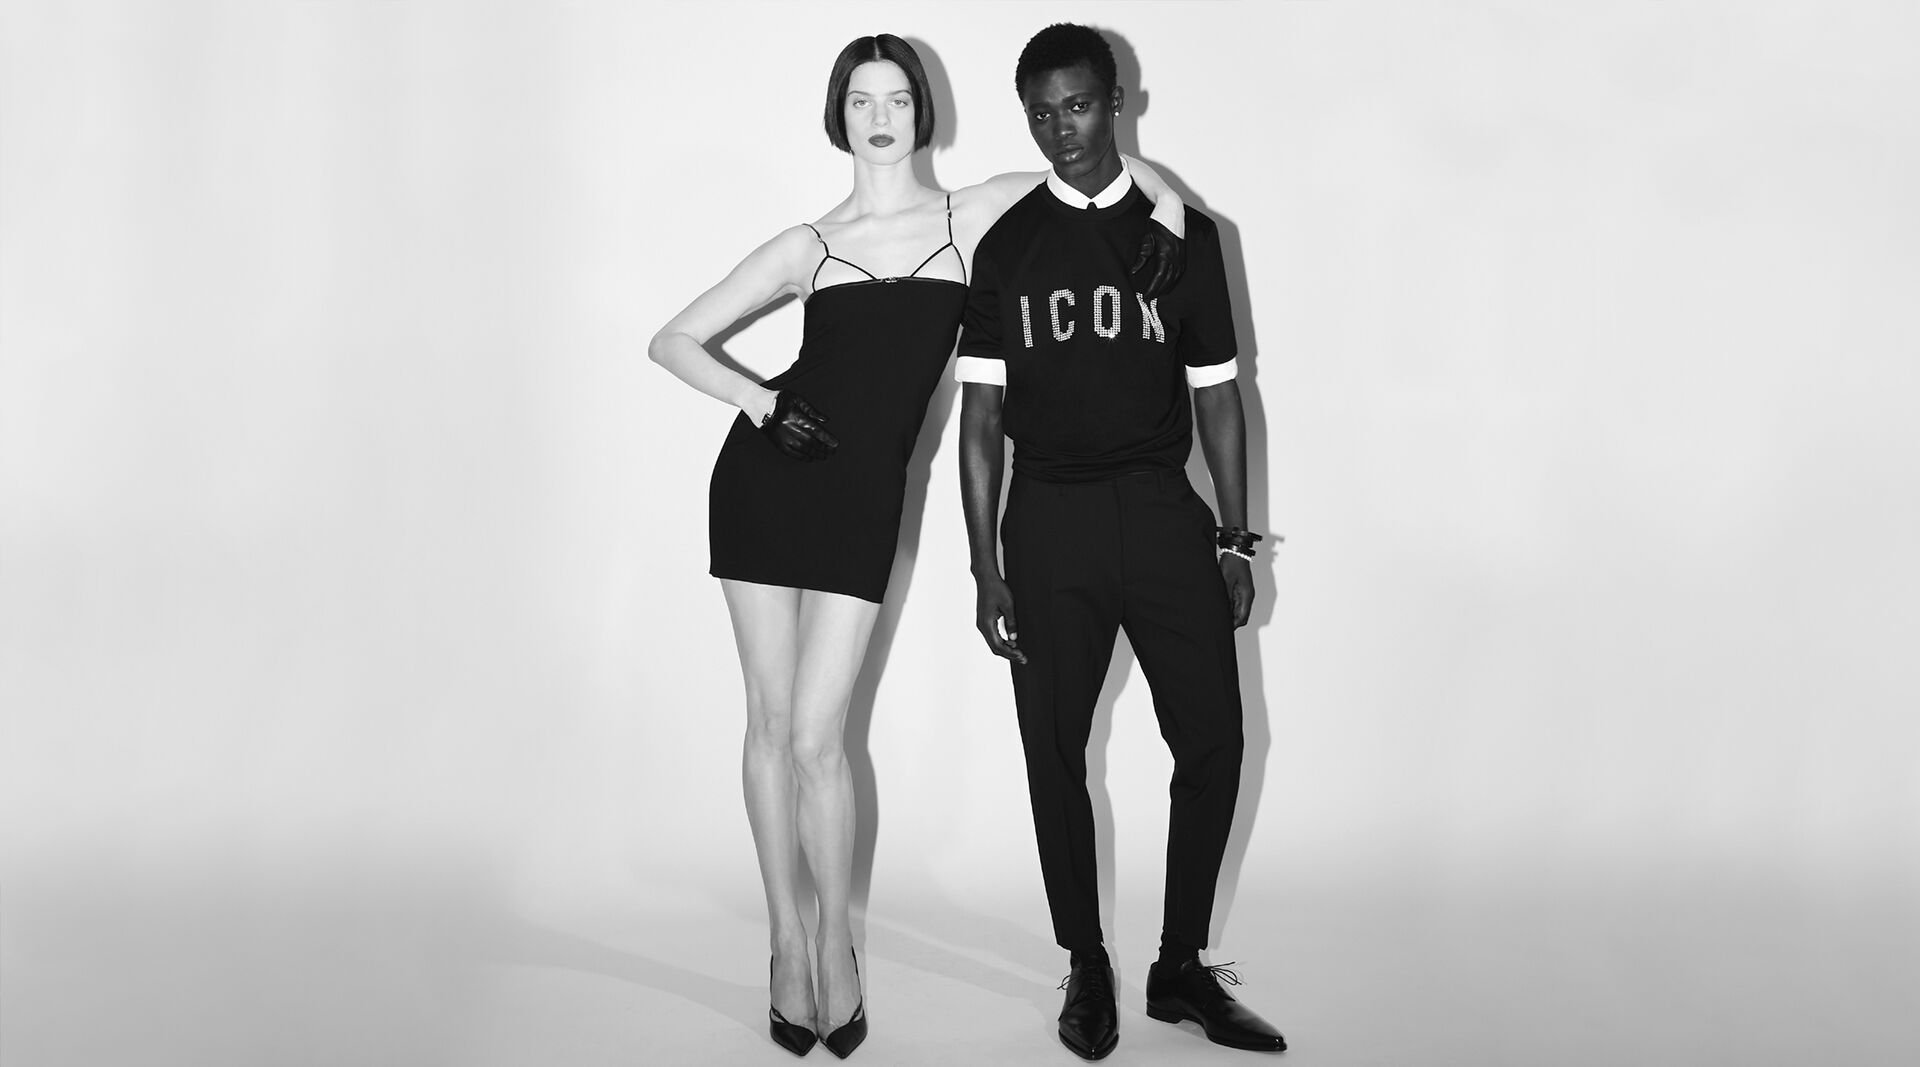 picture in black and white of man and woman. The man is wearing a black tshirt with white ICON logo and black elegant pants. the woman is wearing a black tight dress with high heels. 